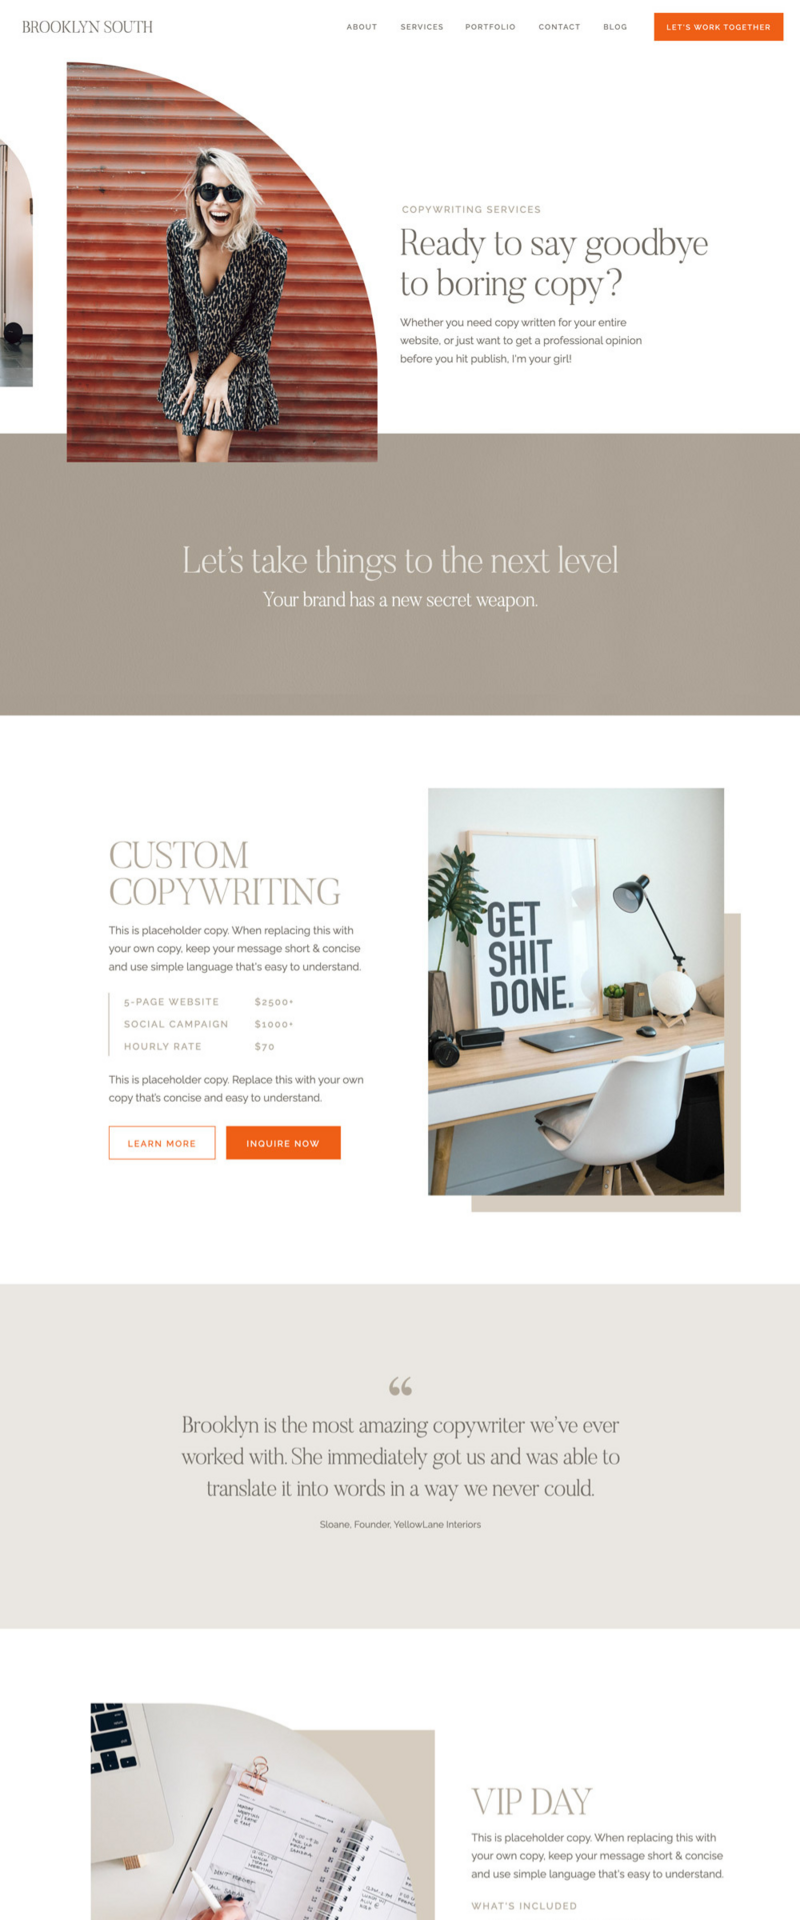 showit_template_for_creative_service_providers_-_brooklyn_south_3